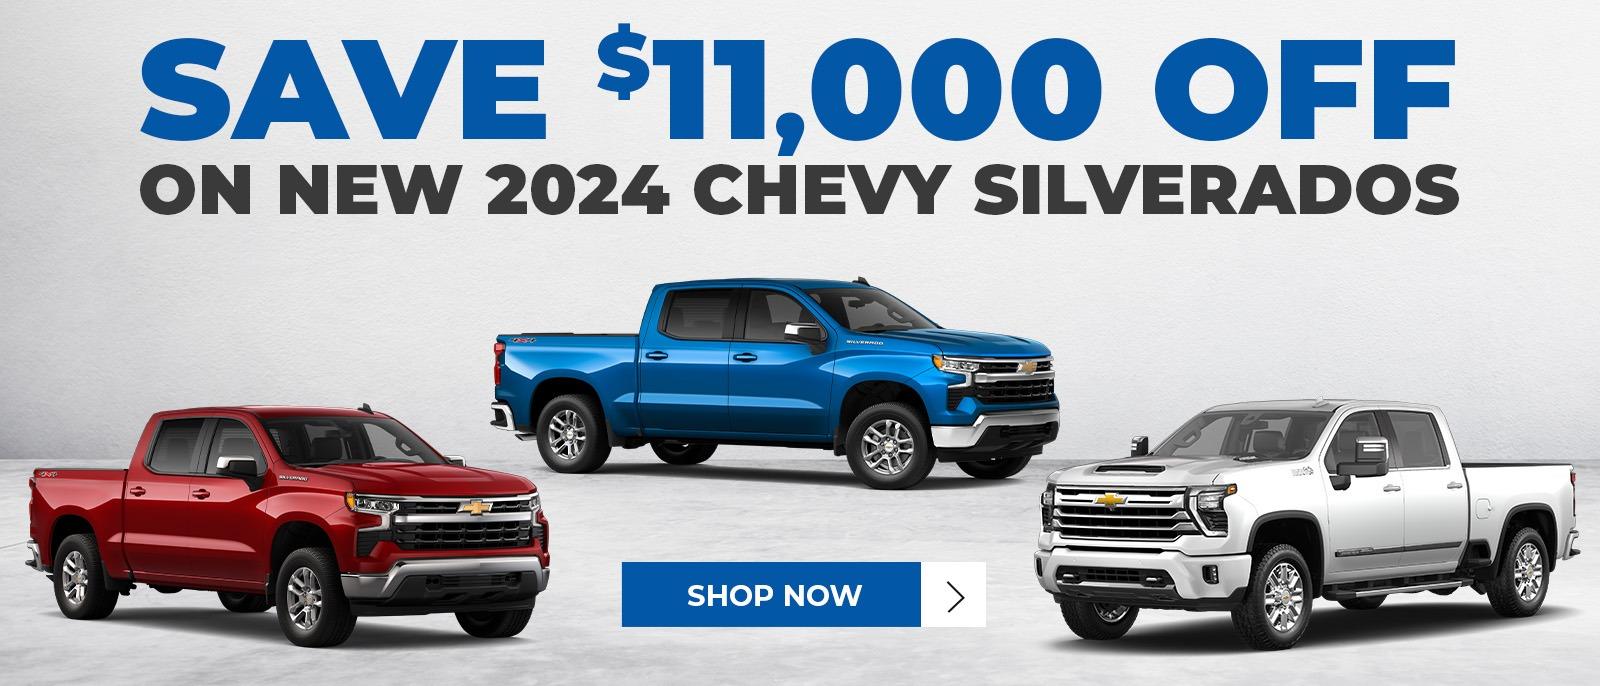 SAVE THOUSANDS ON NEW 2024 CHEVY SILVERADOS